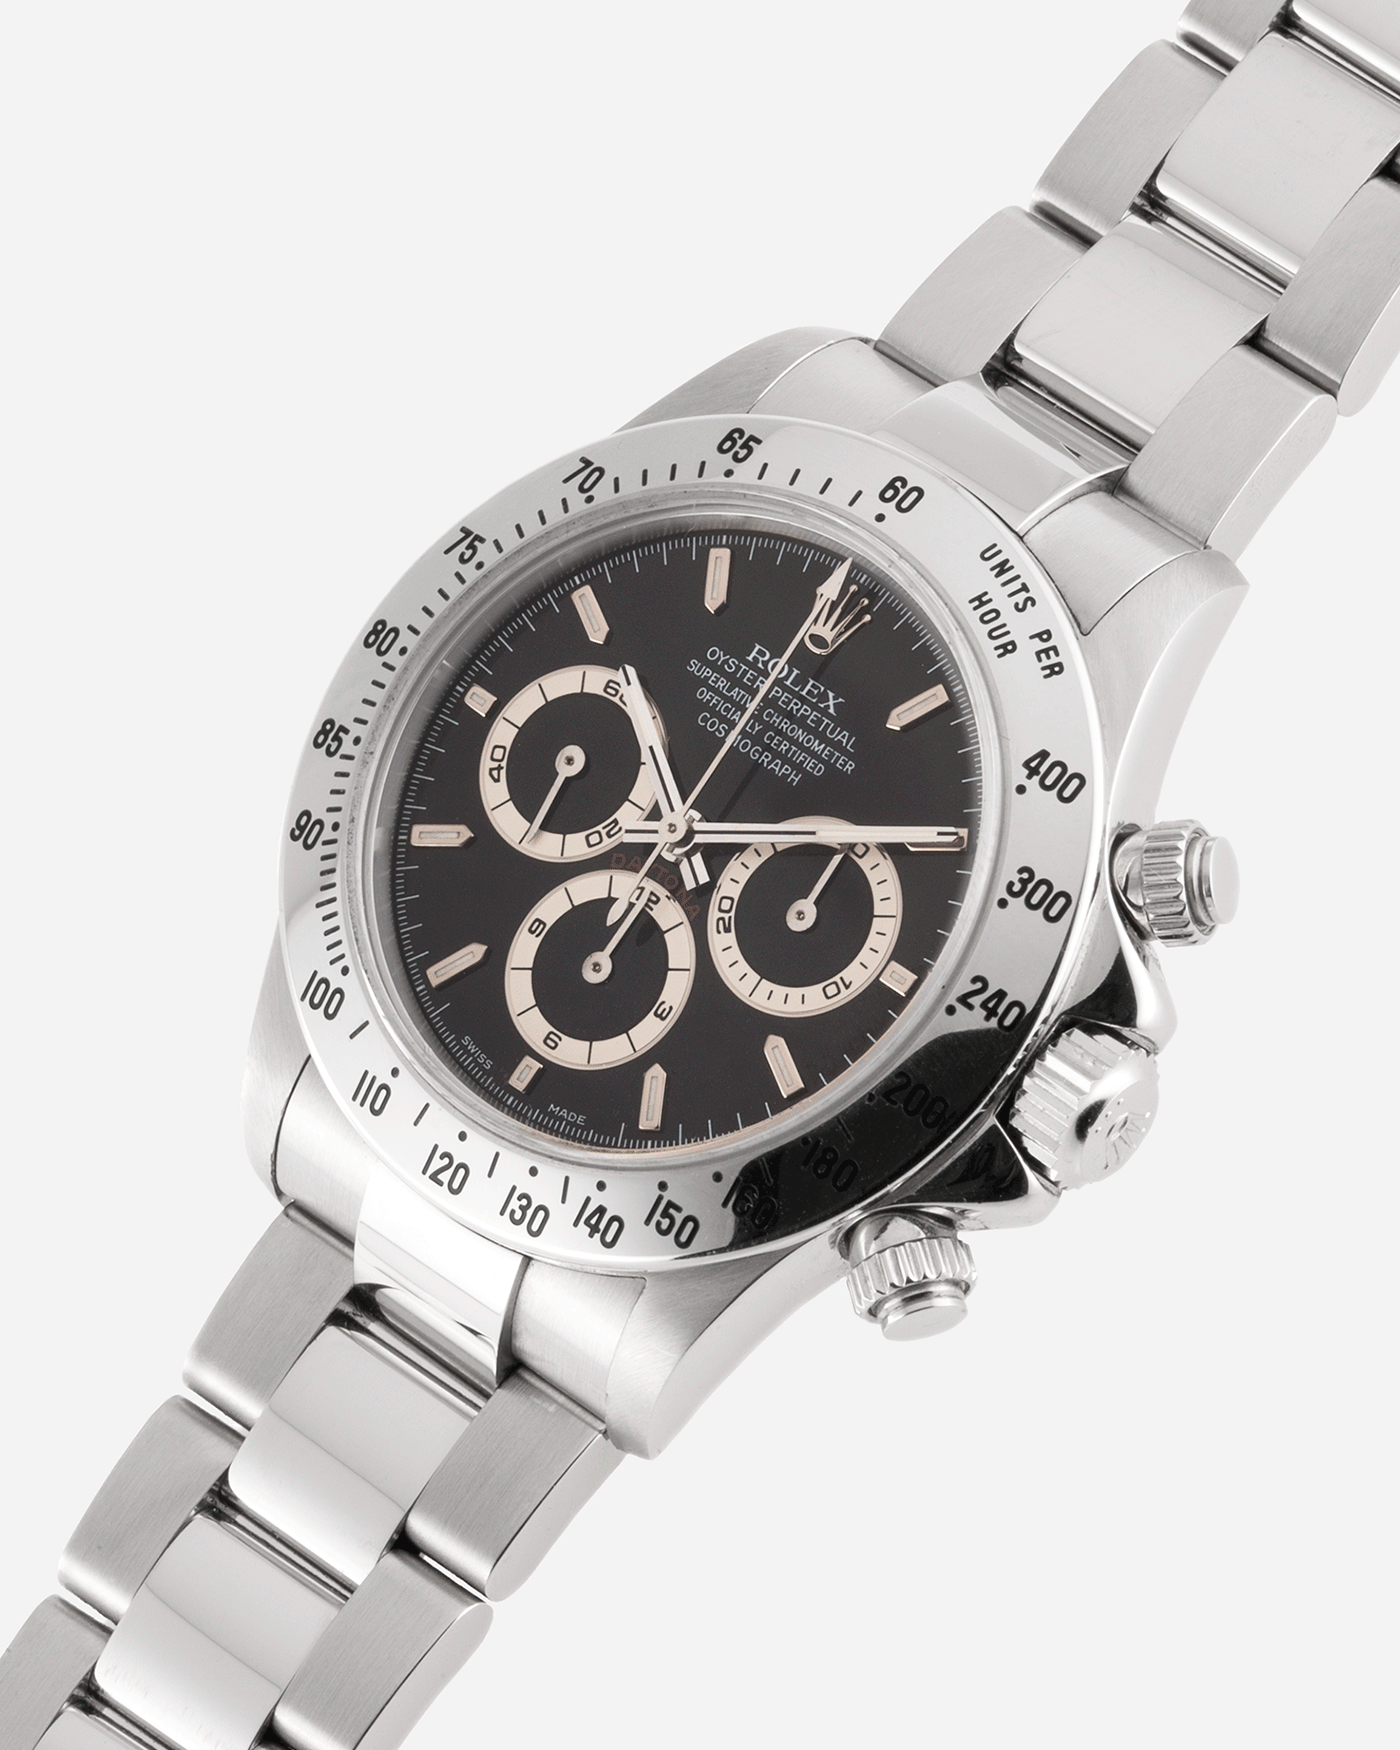 Brand: Rolex Year: 2000 Model: Cosmograph Daytona Reference Number: 16520 Material: Stainless Steel Movement: Rolex Zenith El Primero Caliber 4030  Case Diameter: 40mm Bracelet: Stainless Steel Rolex Oyster Bracelet